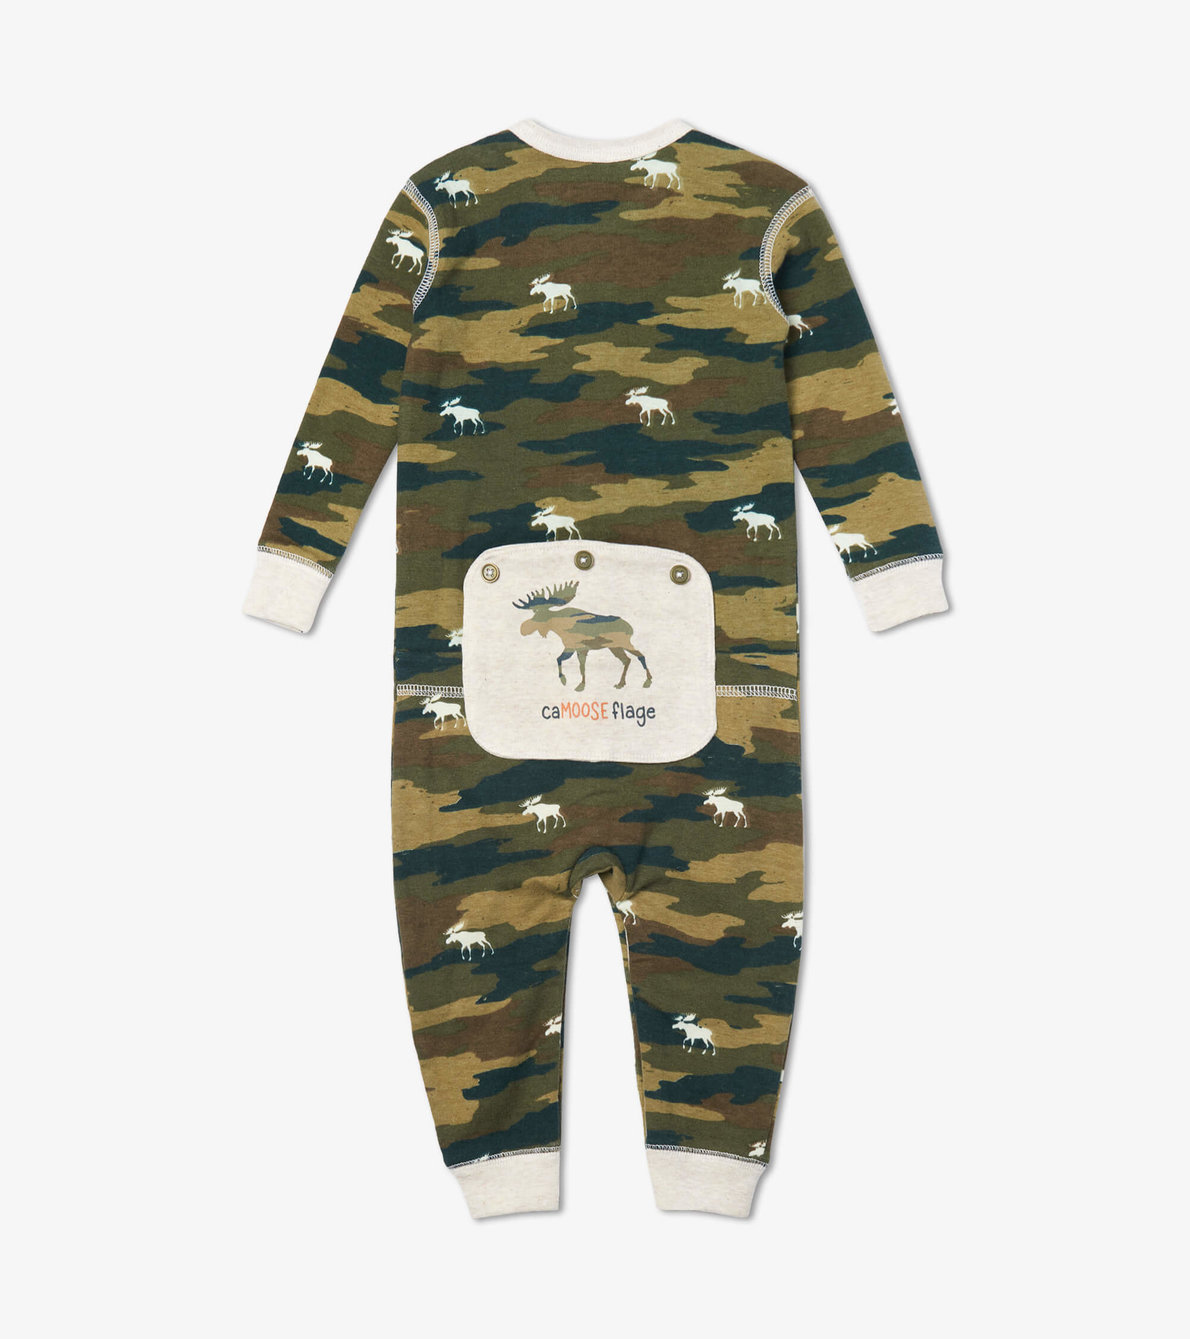 View larger image of Camooseflage Baby Union Suit